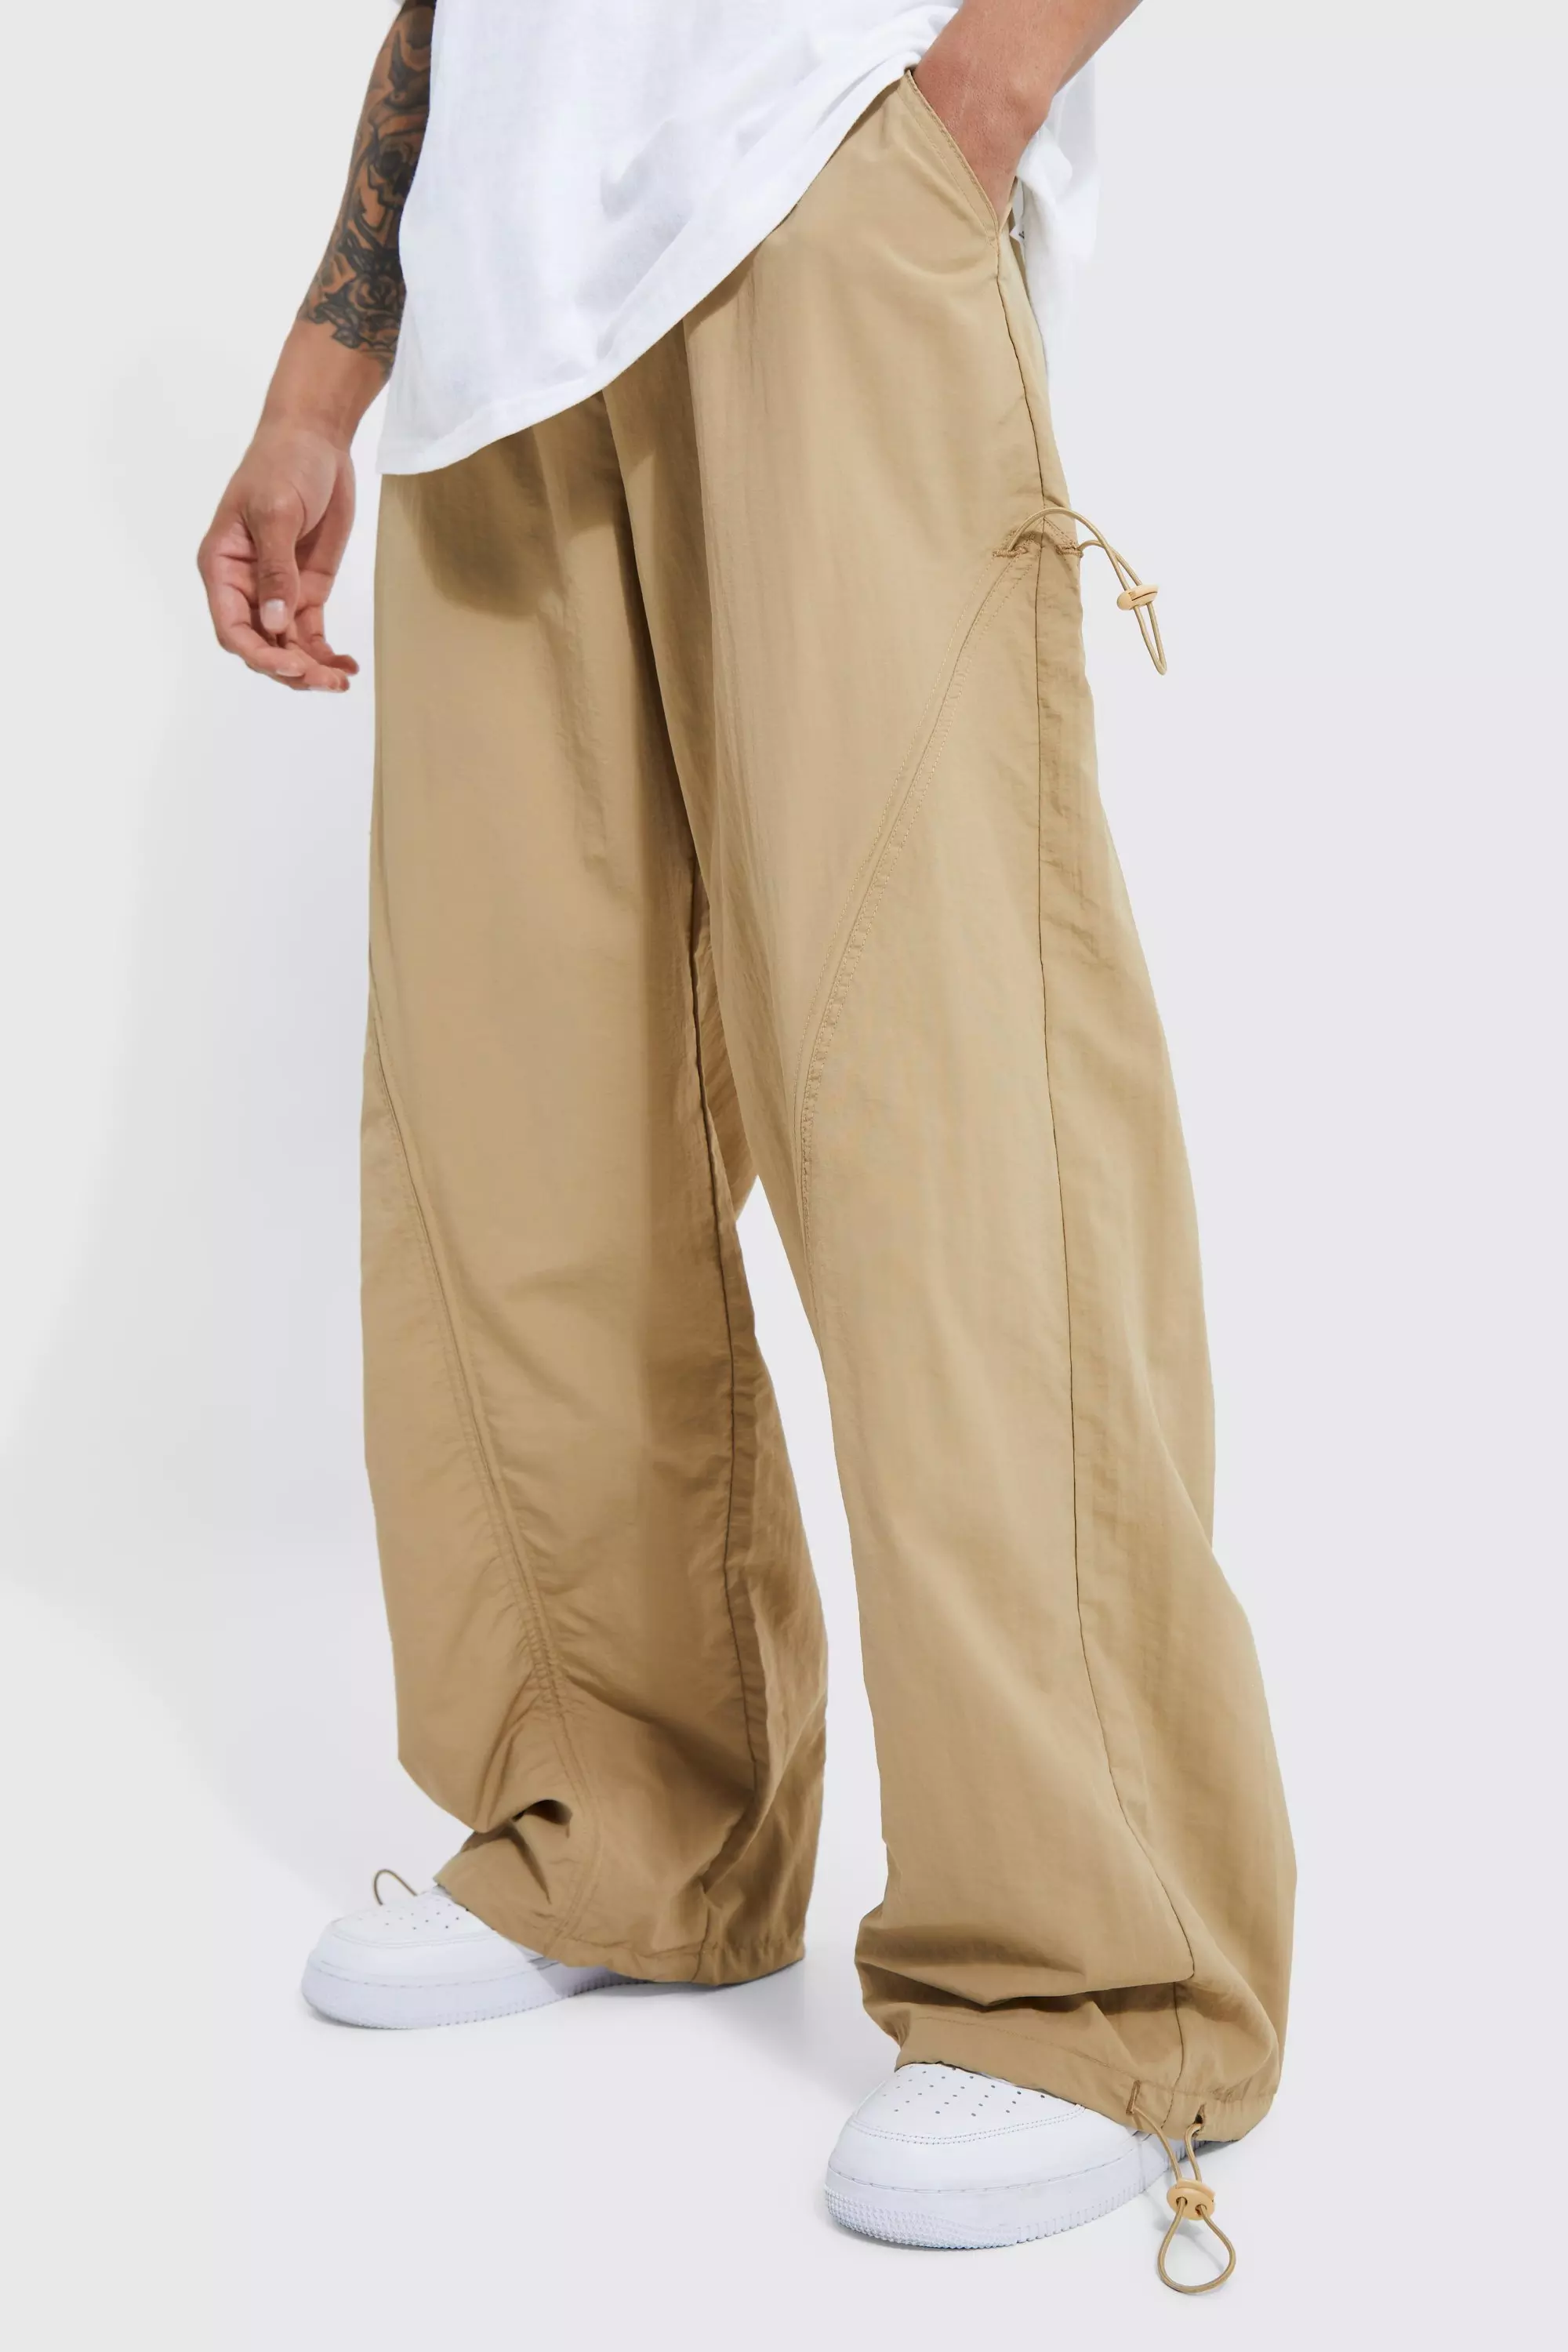 Stone Beige Elastic Waist Oversized Centre Front Ruched Pants